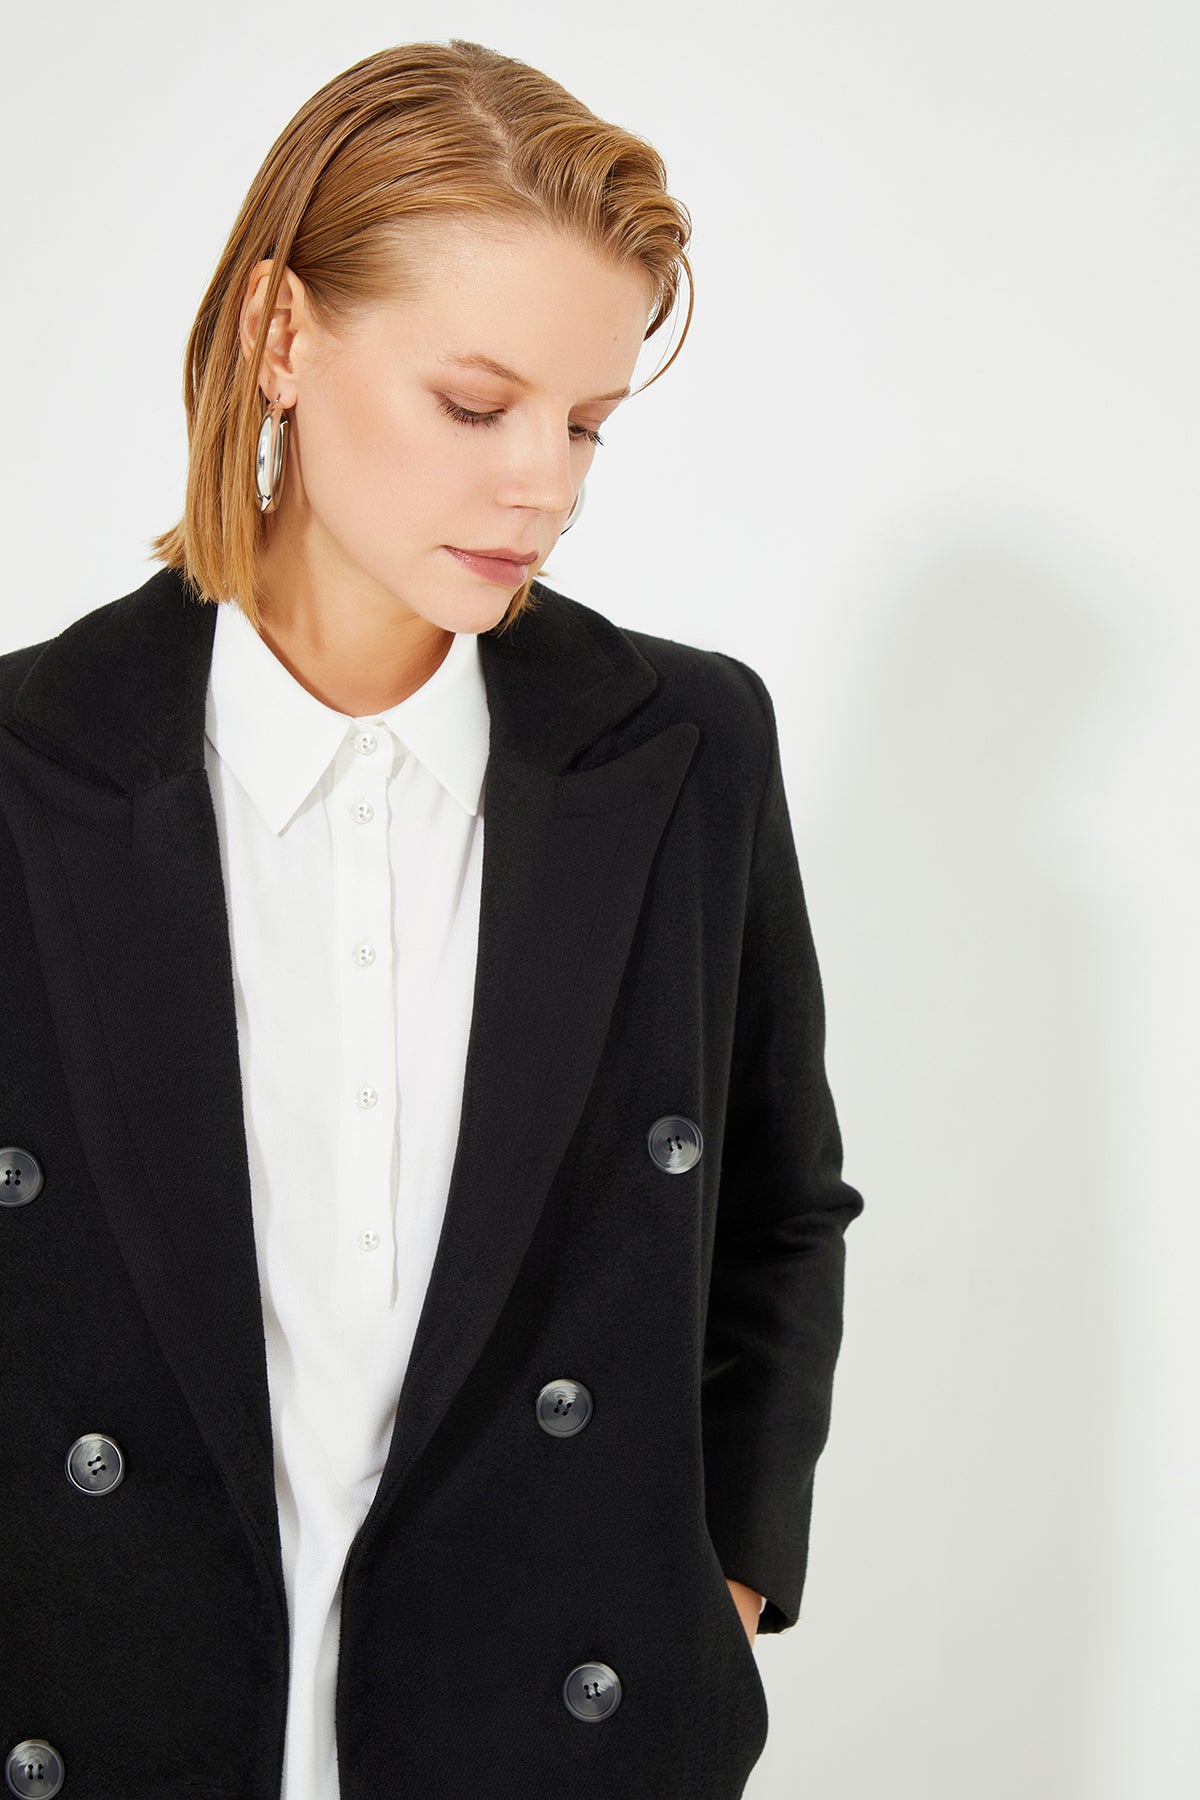 Black Double Breasted Front Button Closure Long Women's Coat